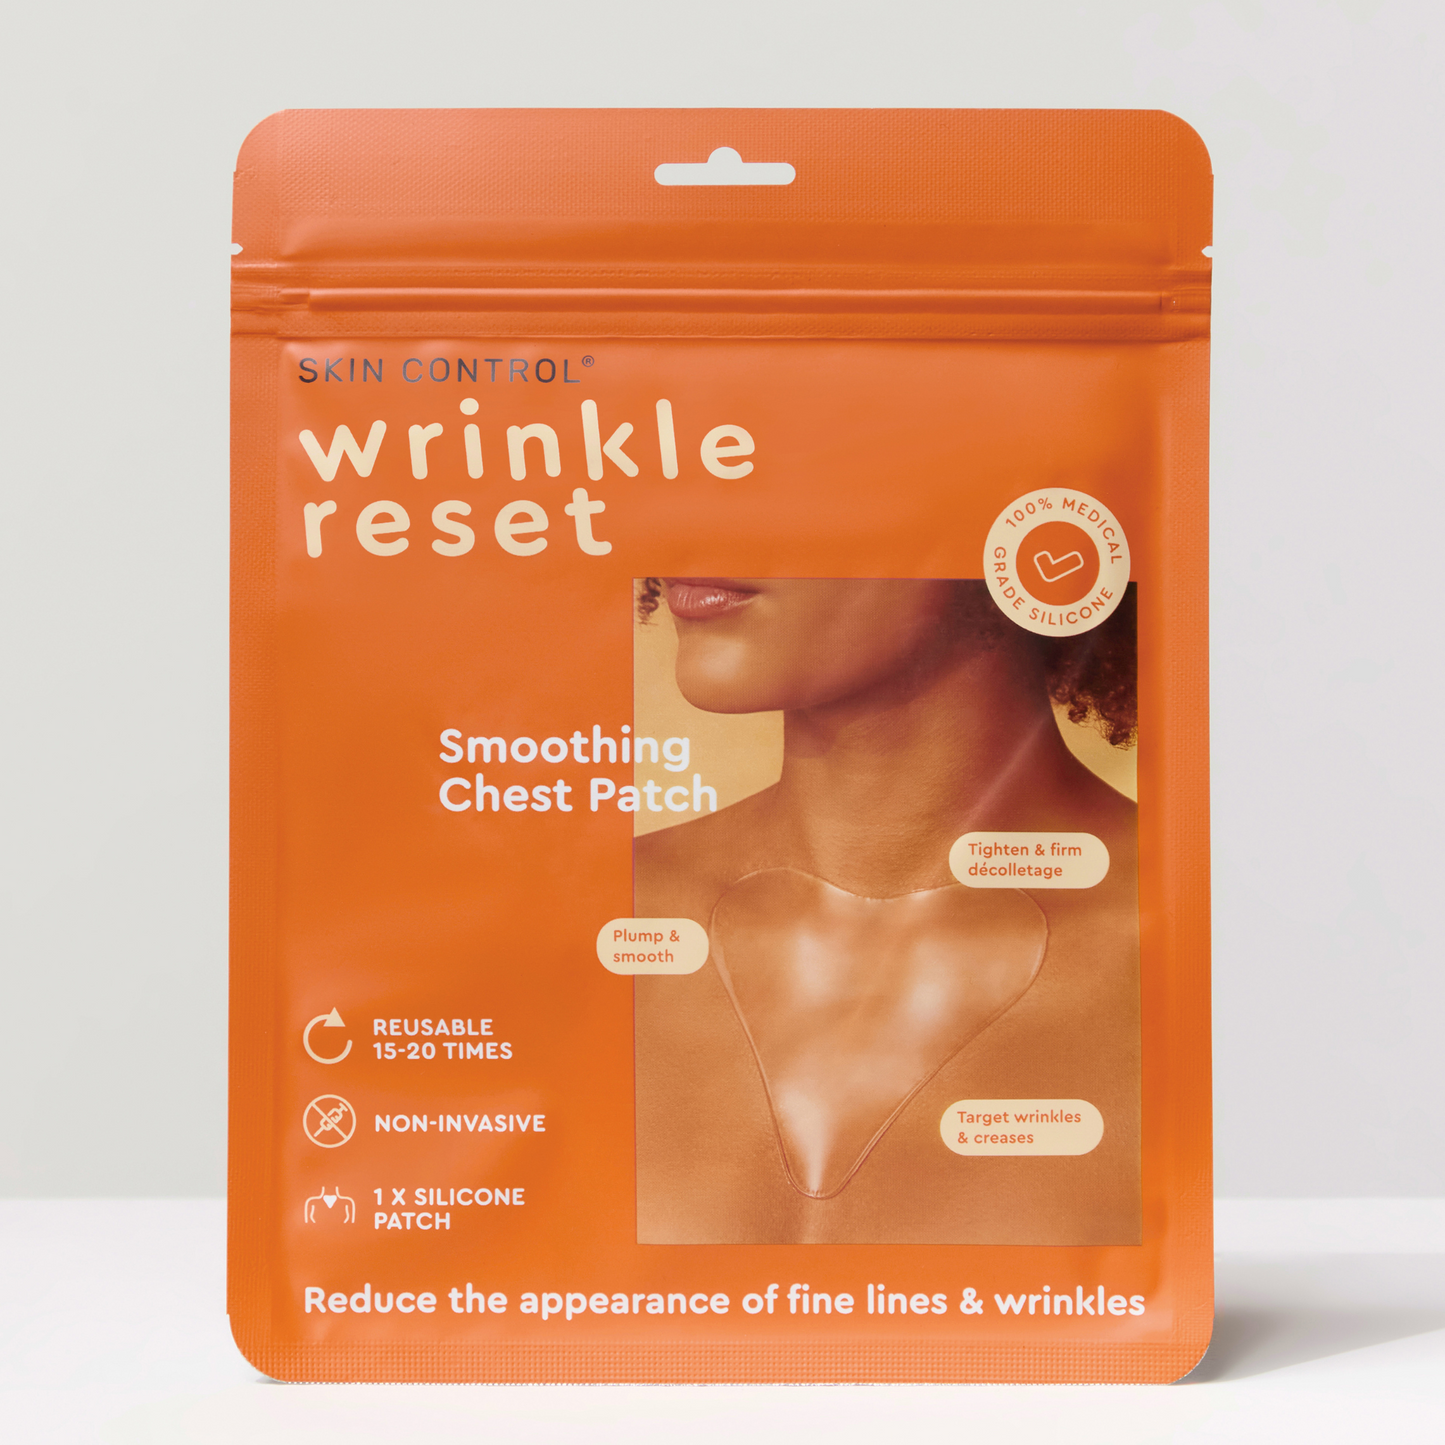 NEW WRINKLE RESET CHEST PATCH